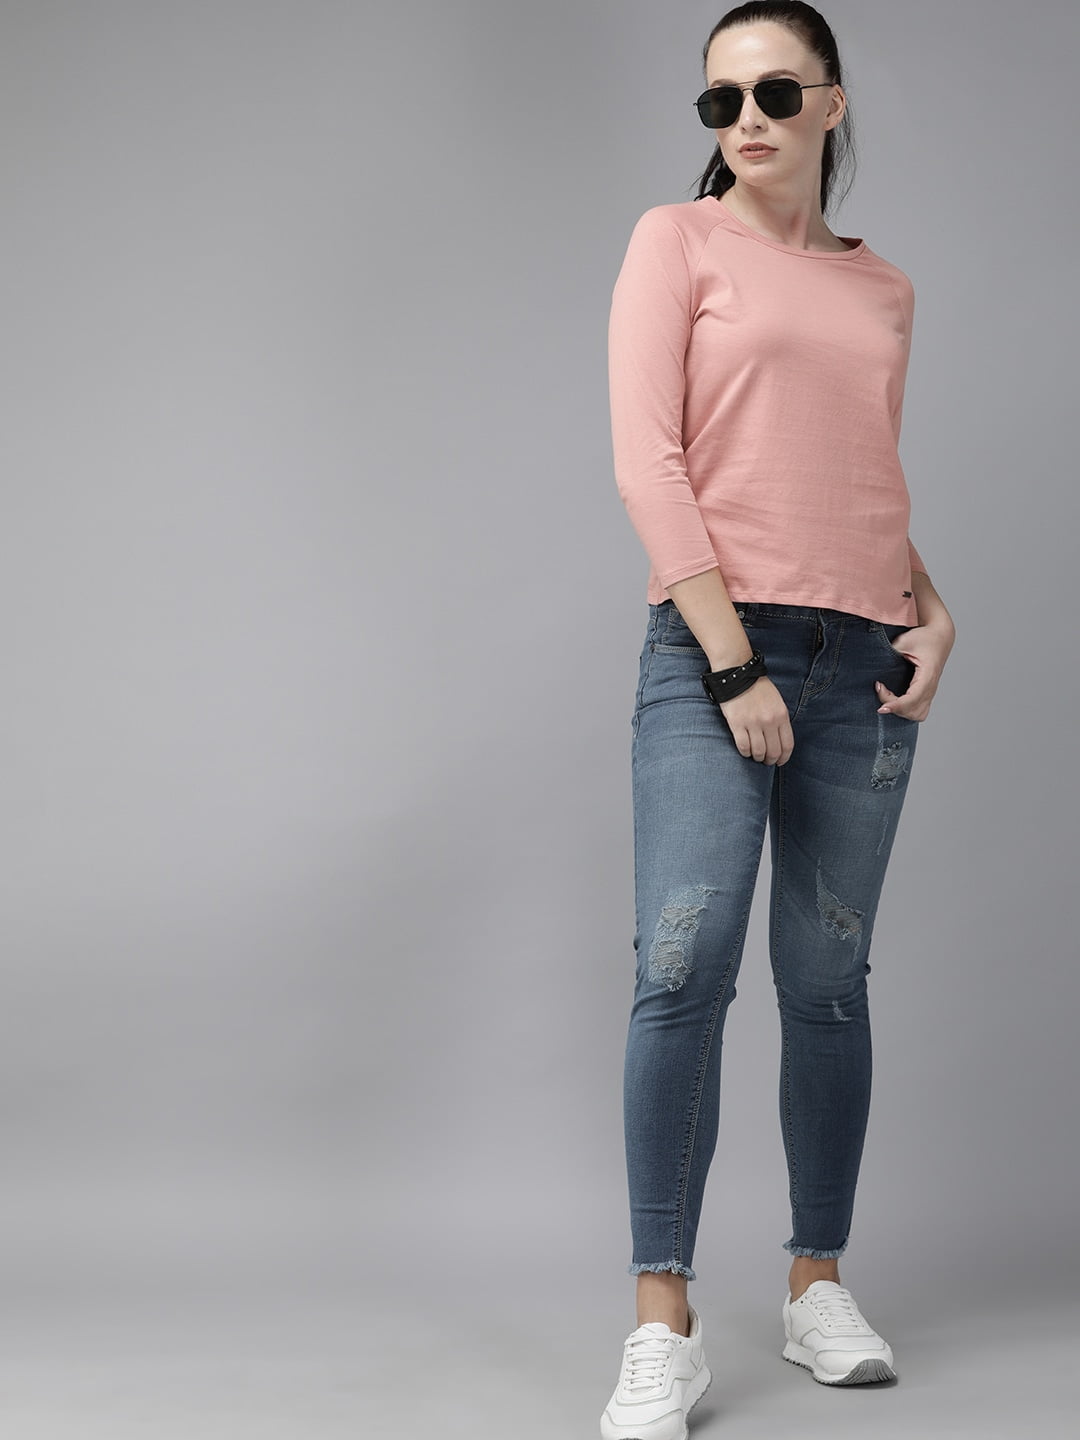 Discover 56+ myntra jeans shirts